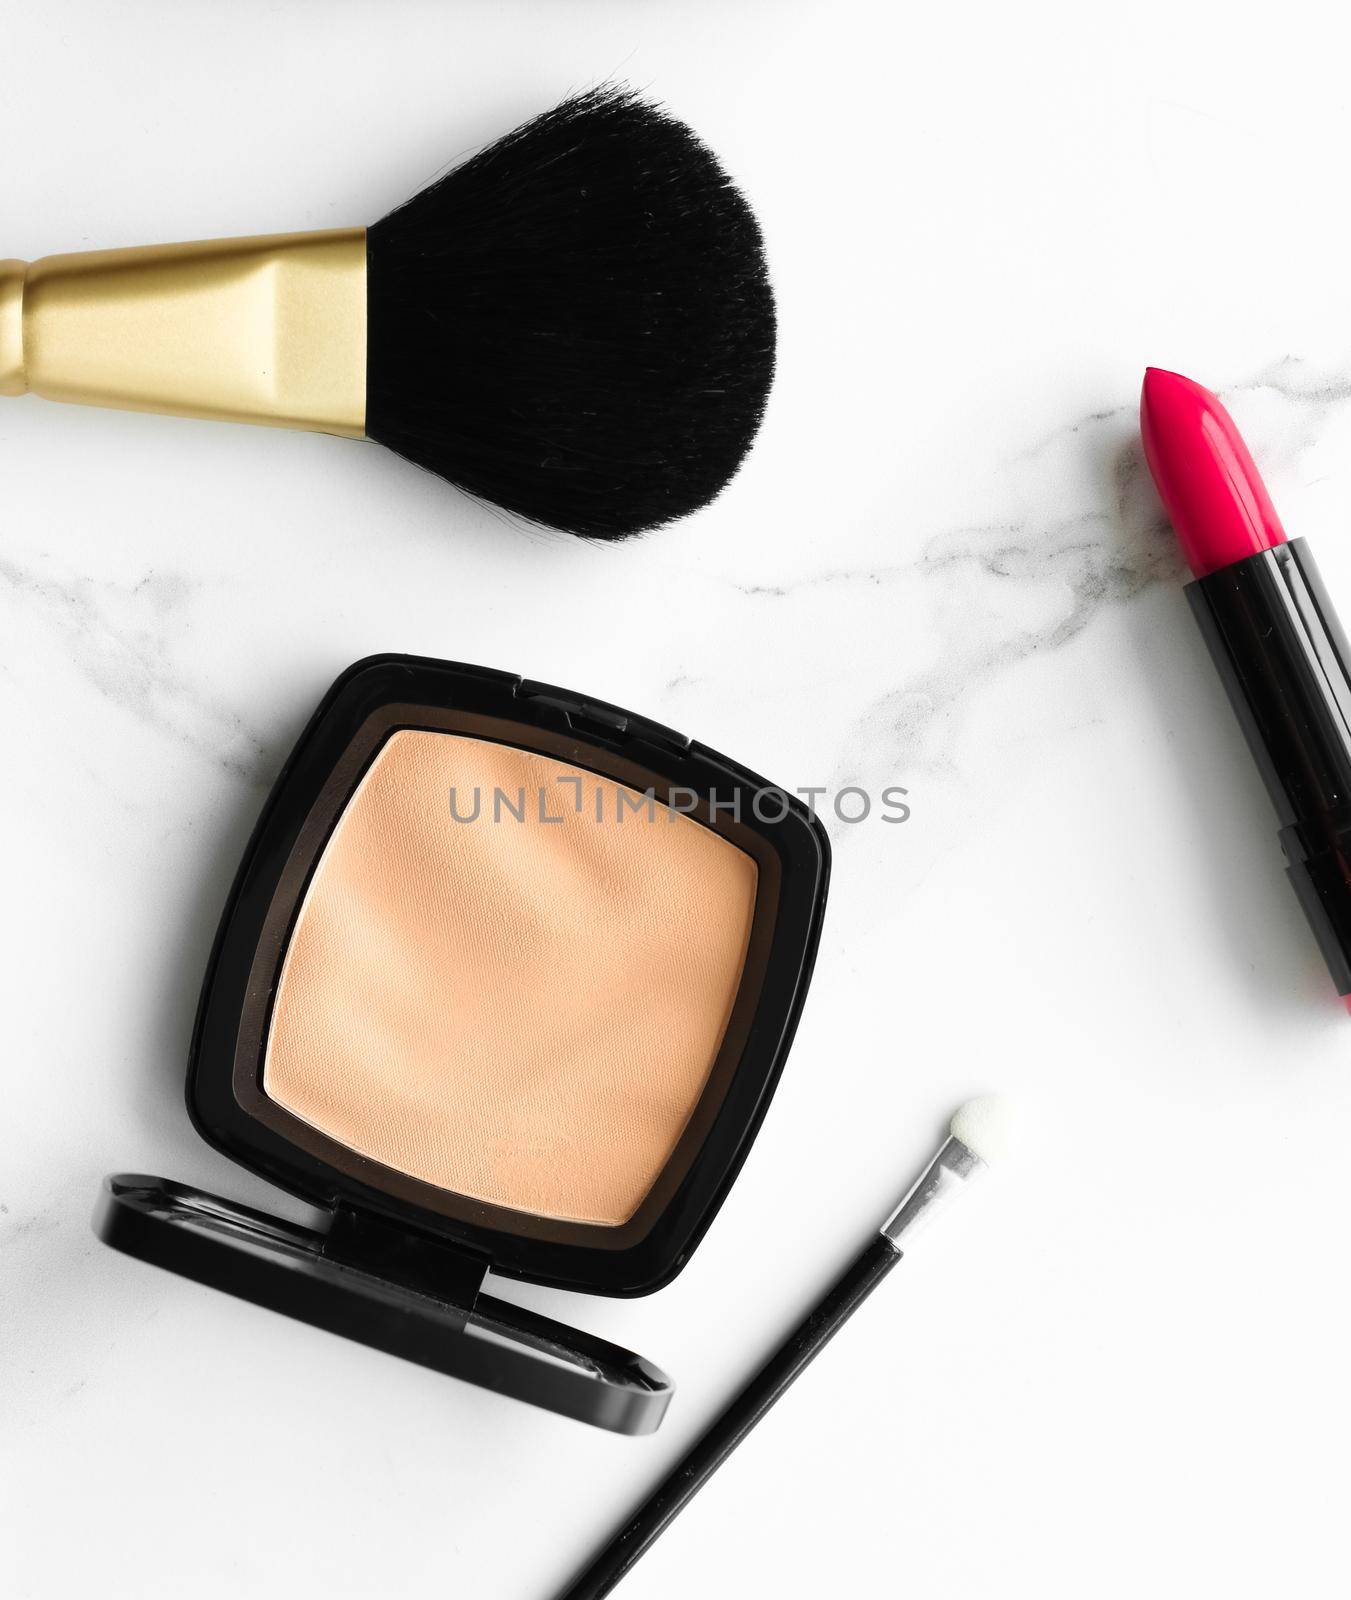 Make-up and cosmetics on marble, flatlay - modern feminine lifestyle, vlog background and styled stock concept. Beauty inspiration in a fashion blog